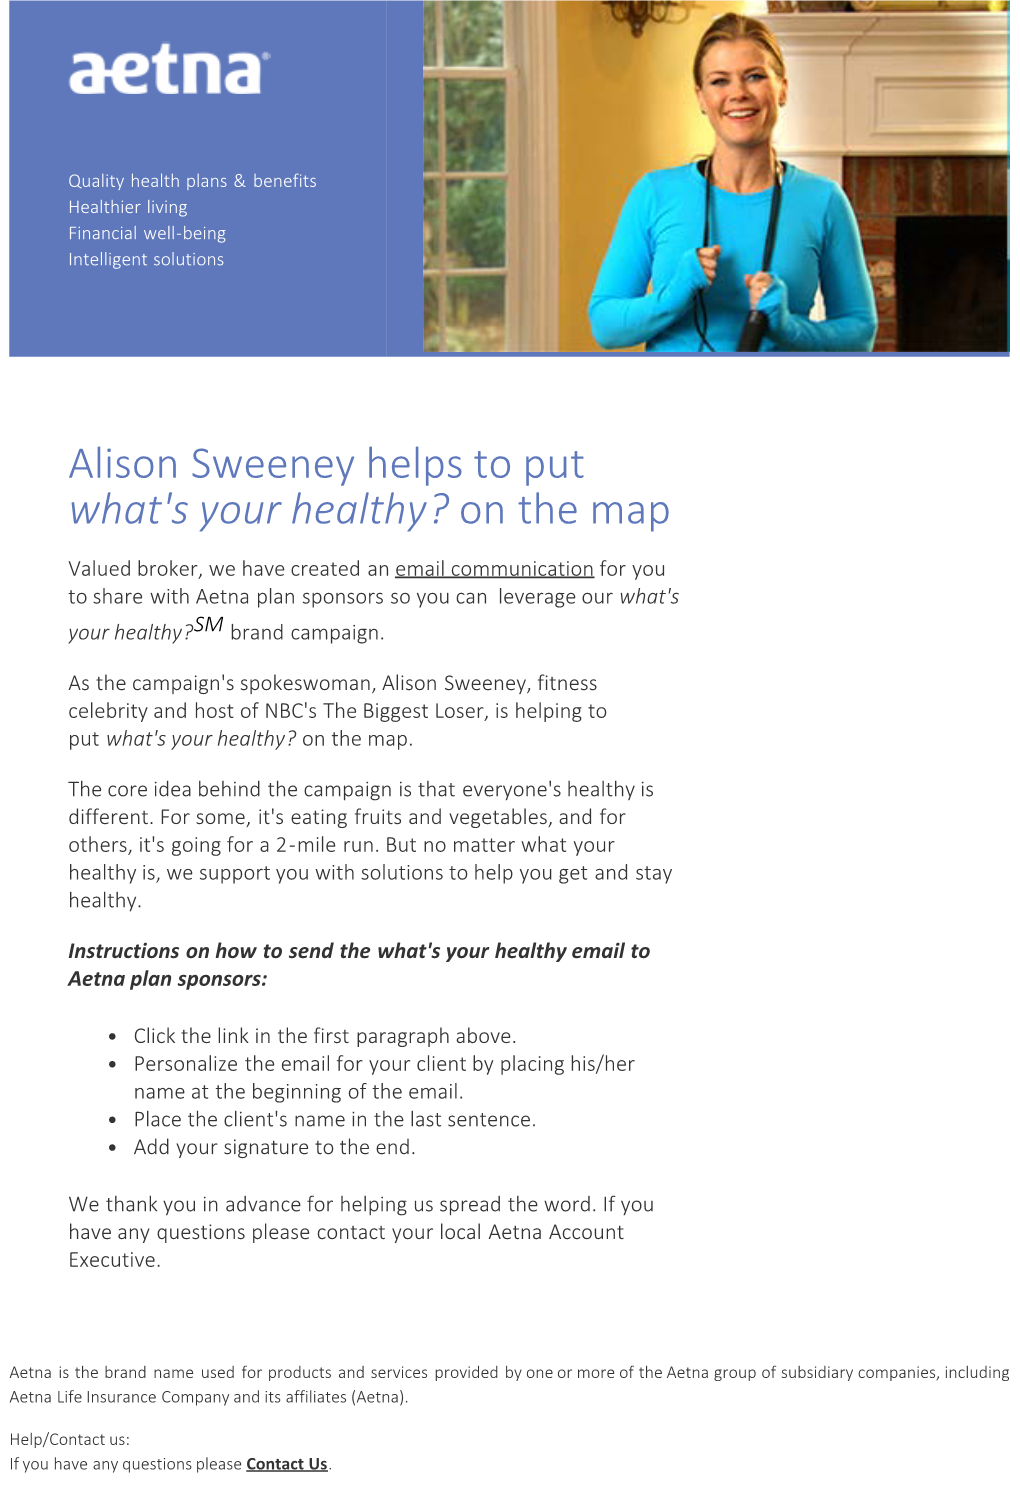 Alison Sweeney Helps to Put What's Your Healthy? on the Map